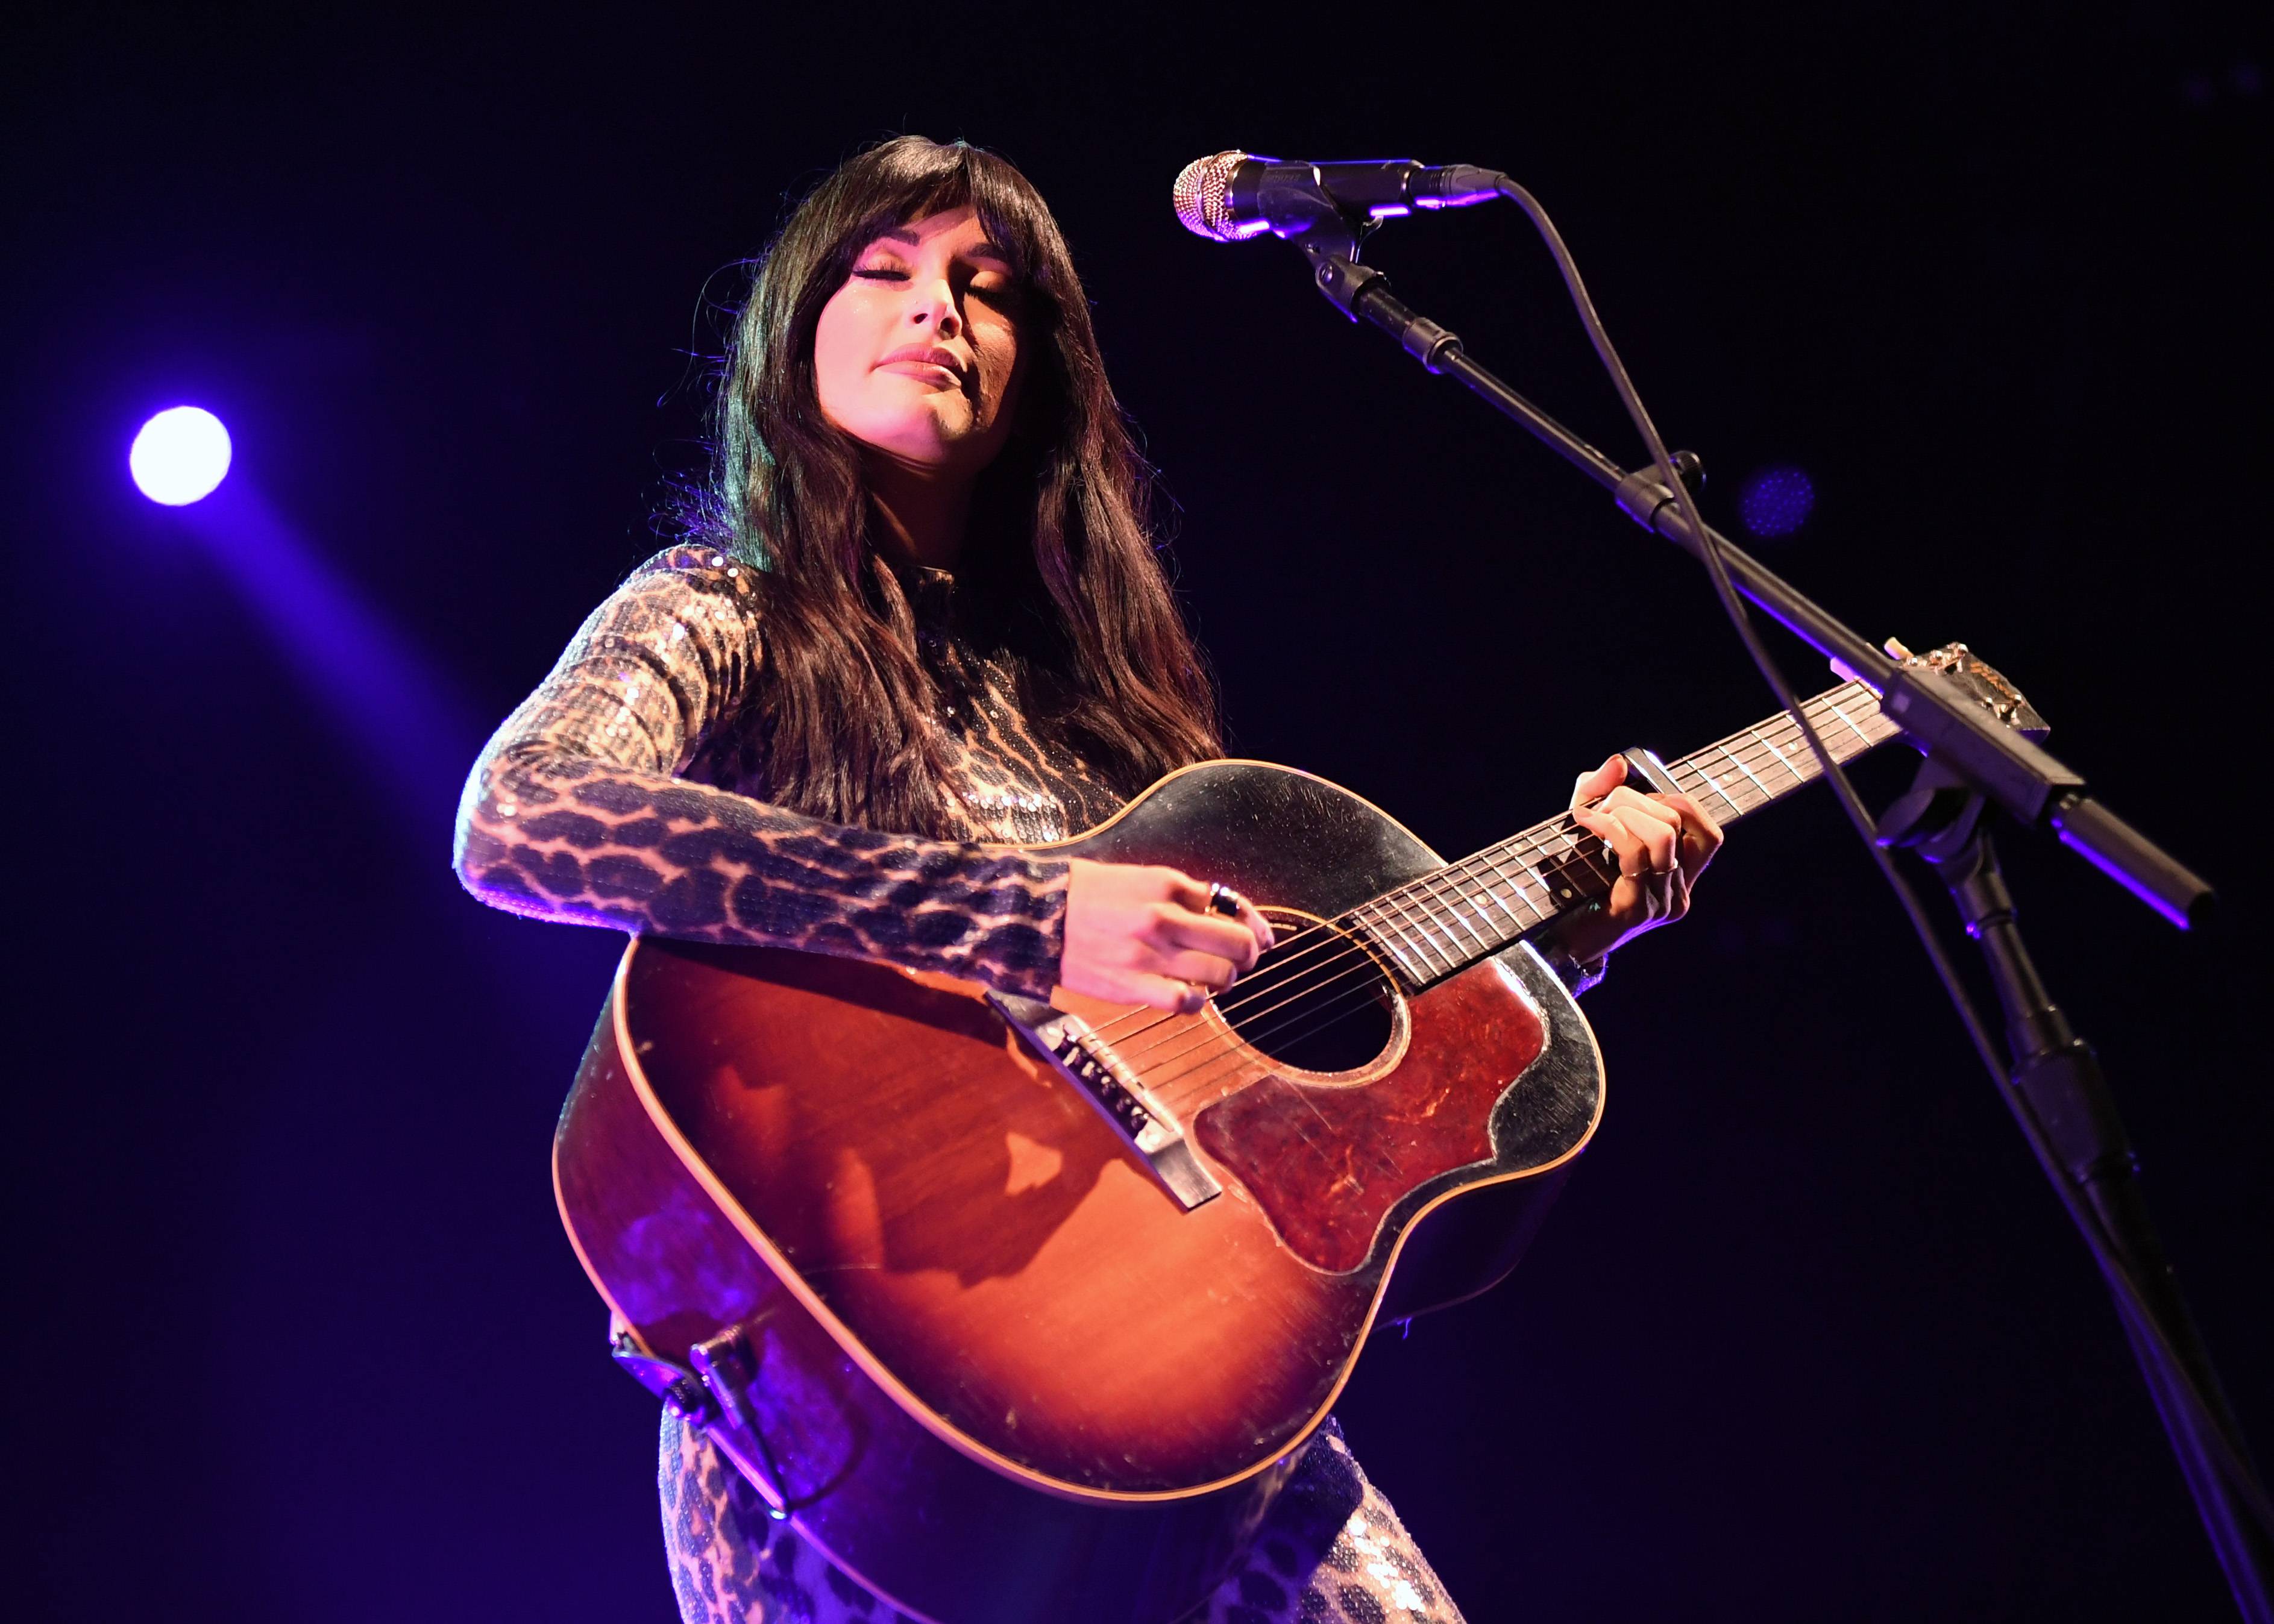 LAS VEGAS, NEVADA - DECEMBER 06: Recording artist Kacey Musgraves performs at the Intersect music festival at the Las Vegas Festival Grounds on December 6, 2019 in Las Vegas, Nevada. 